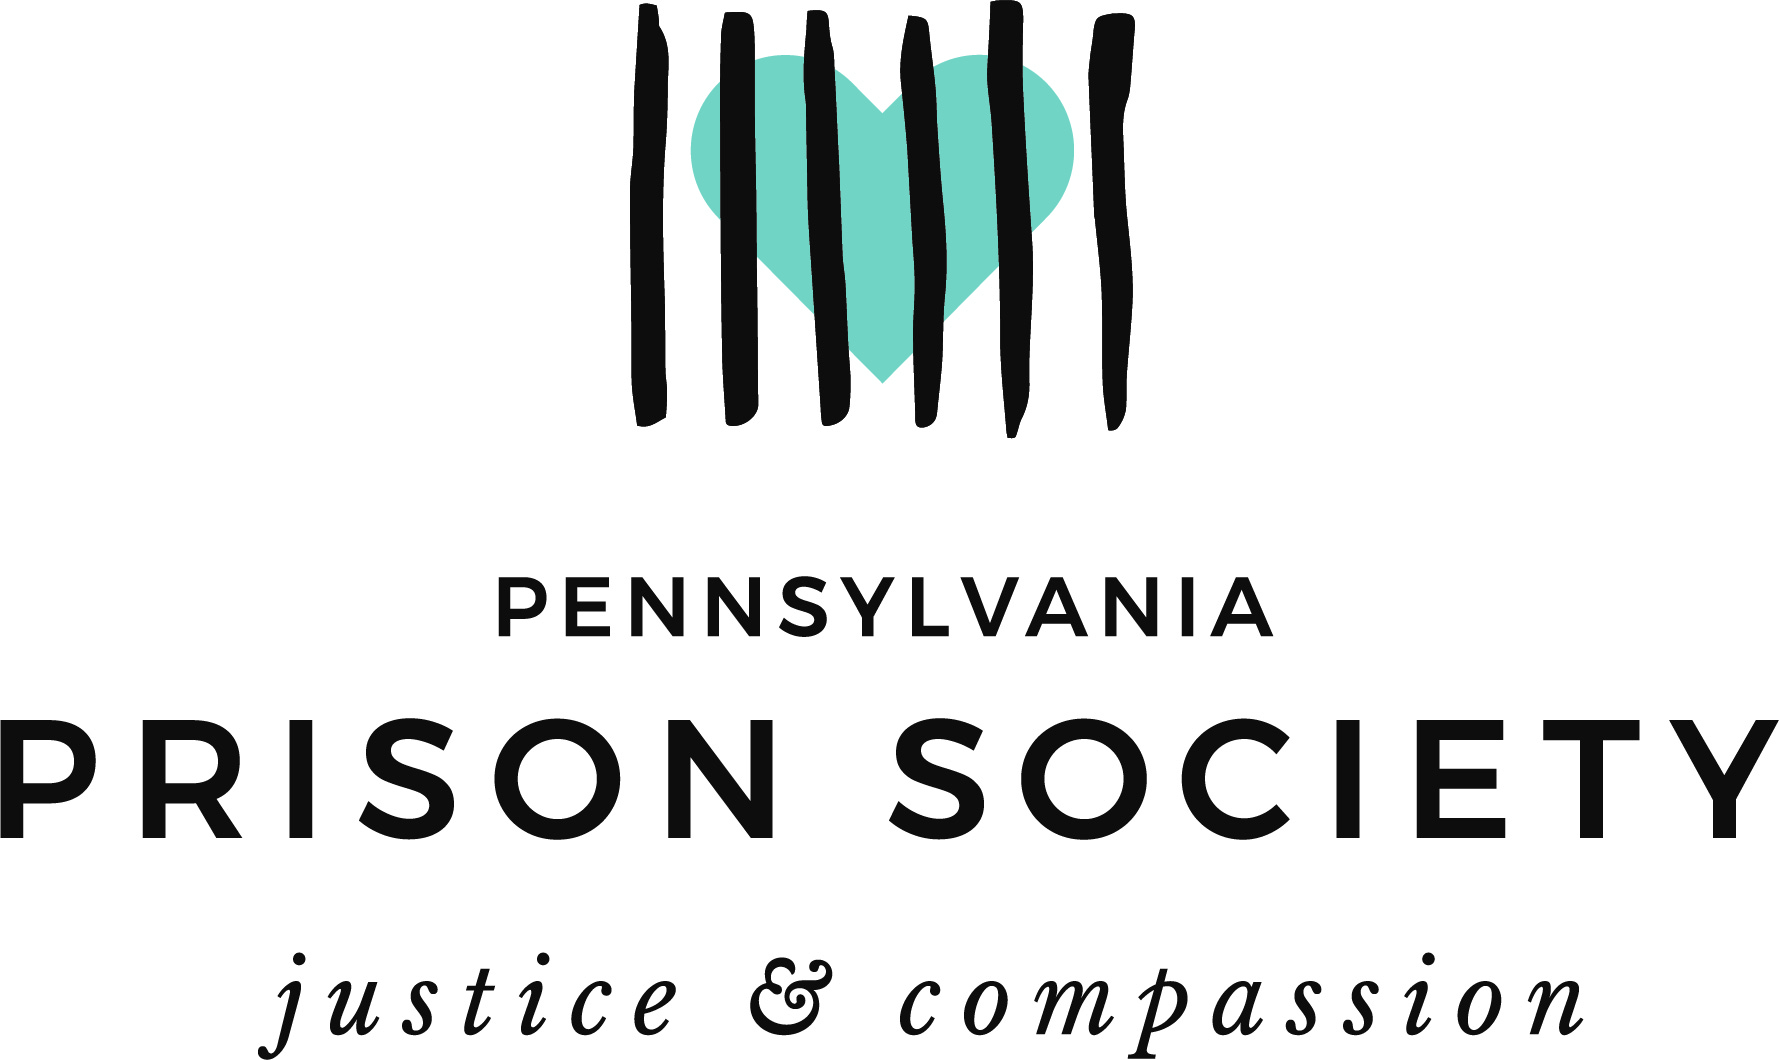 PA Prison Society logo showing a heart with vertical lines through it